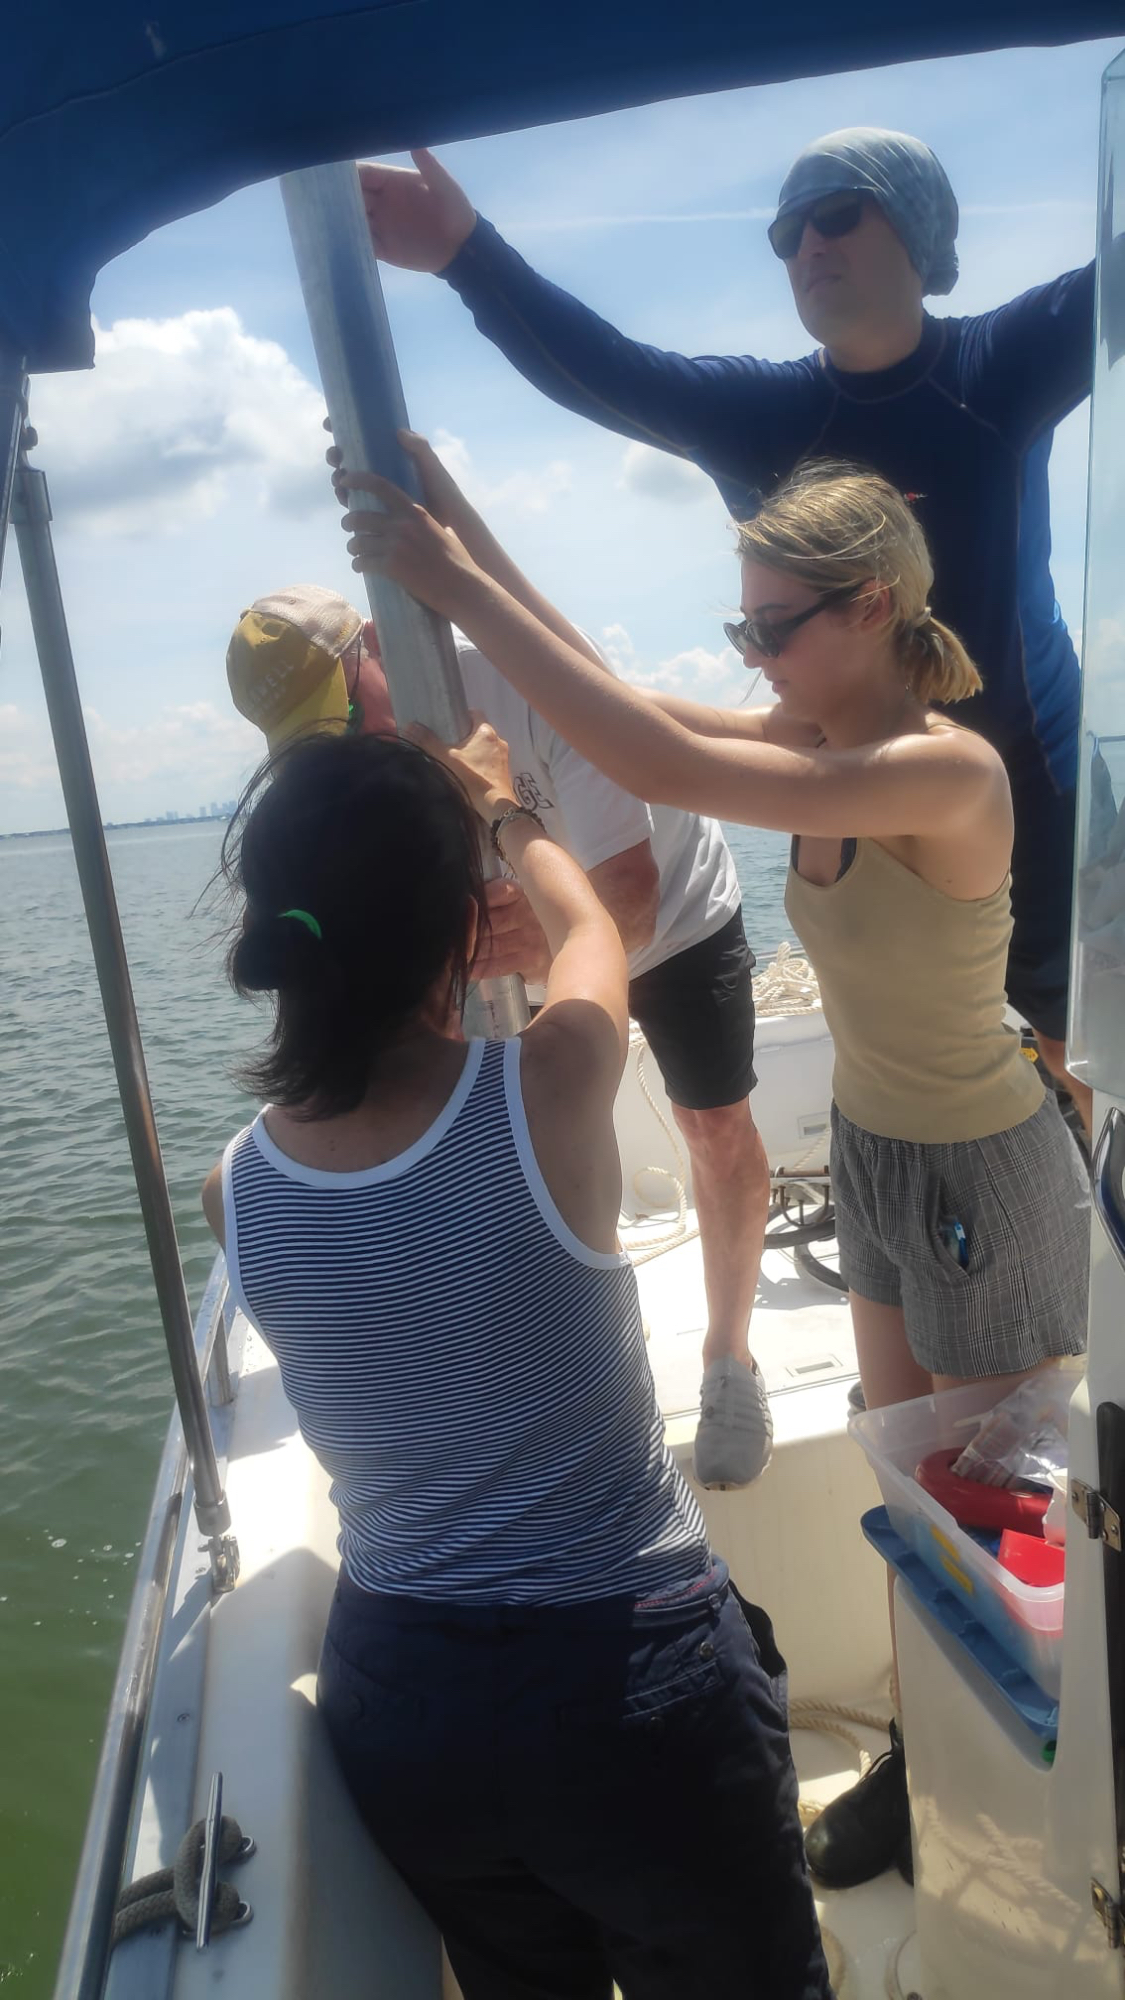 Dr. Francesca Sangiorgi, dr. Gregg Brooks, Suzanne de Zwaan and dr. Patrick Schwing retrieving the sediment core from the water in Tampa Bay